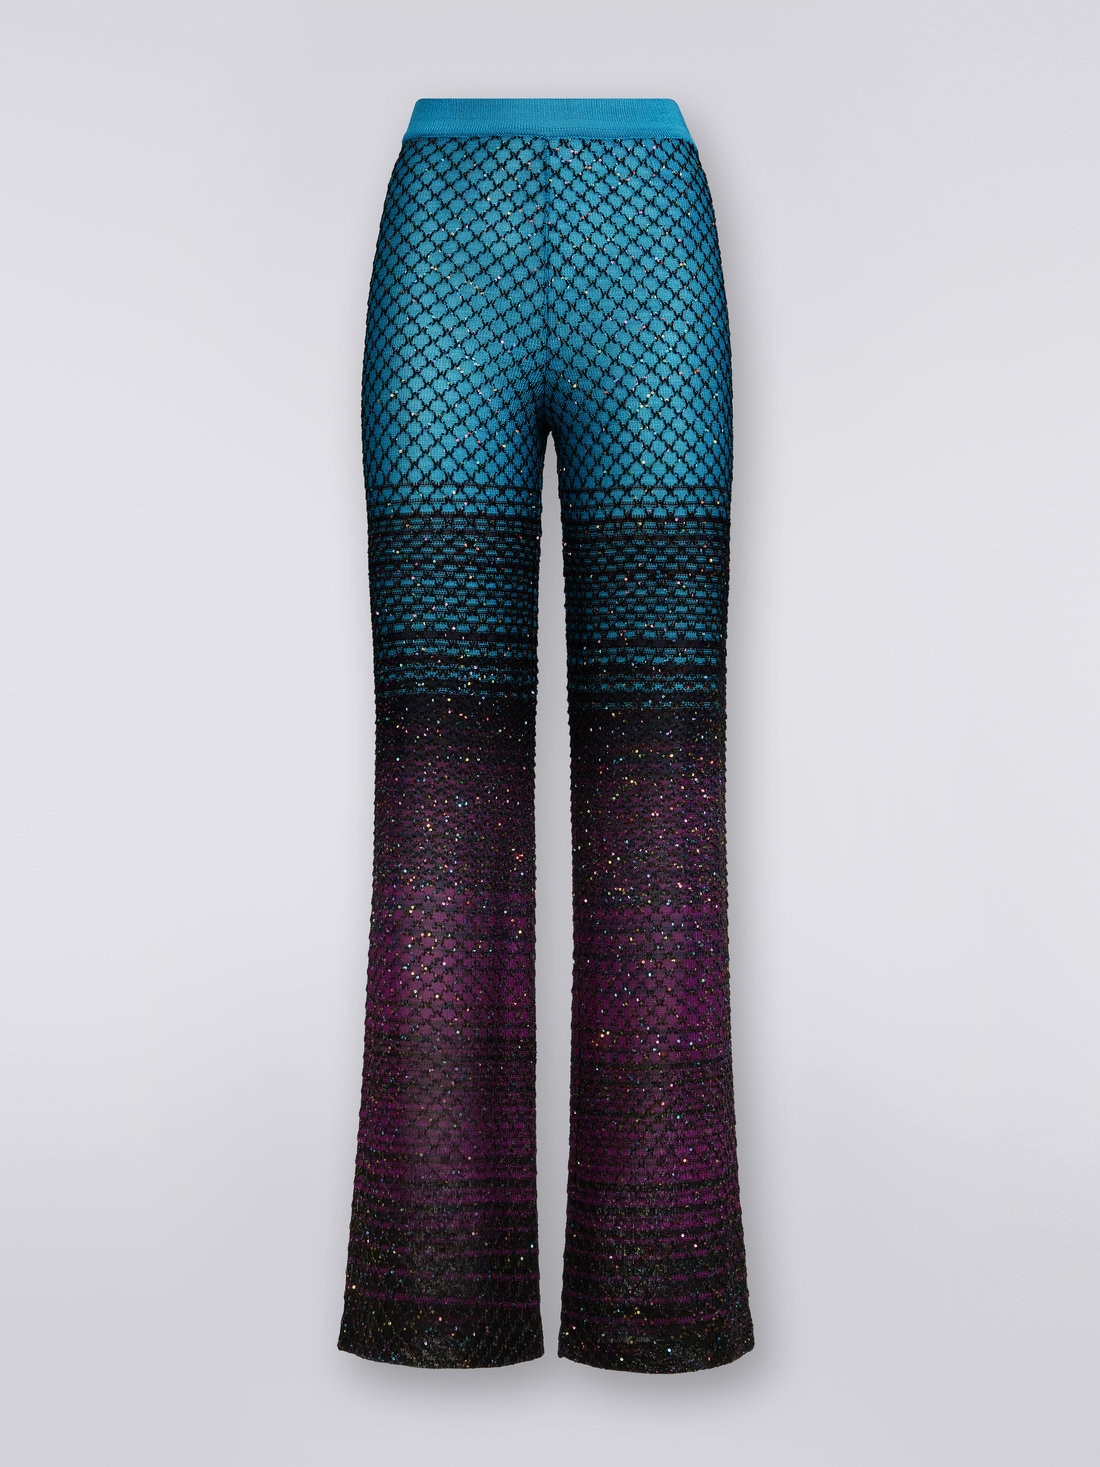 Flared knit trousers with sequins, Turquoise, Purple & Black - DS23SI0ZBK022ISM8NJ - 0